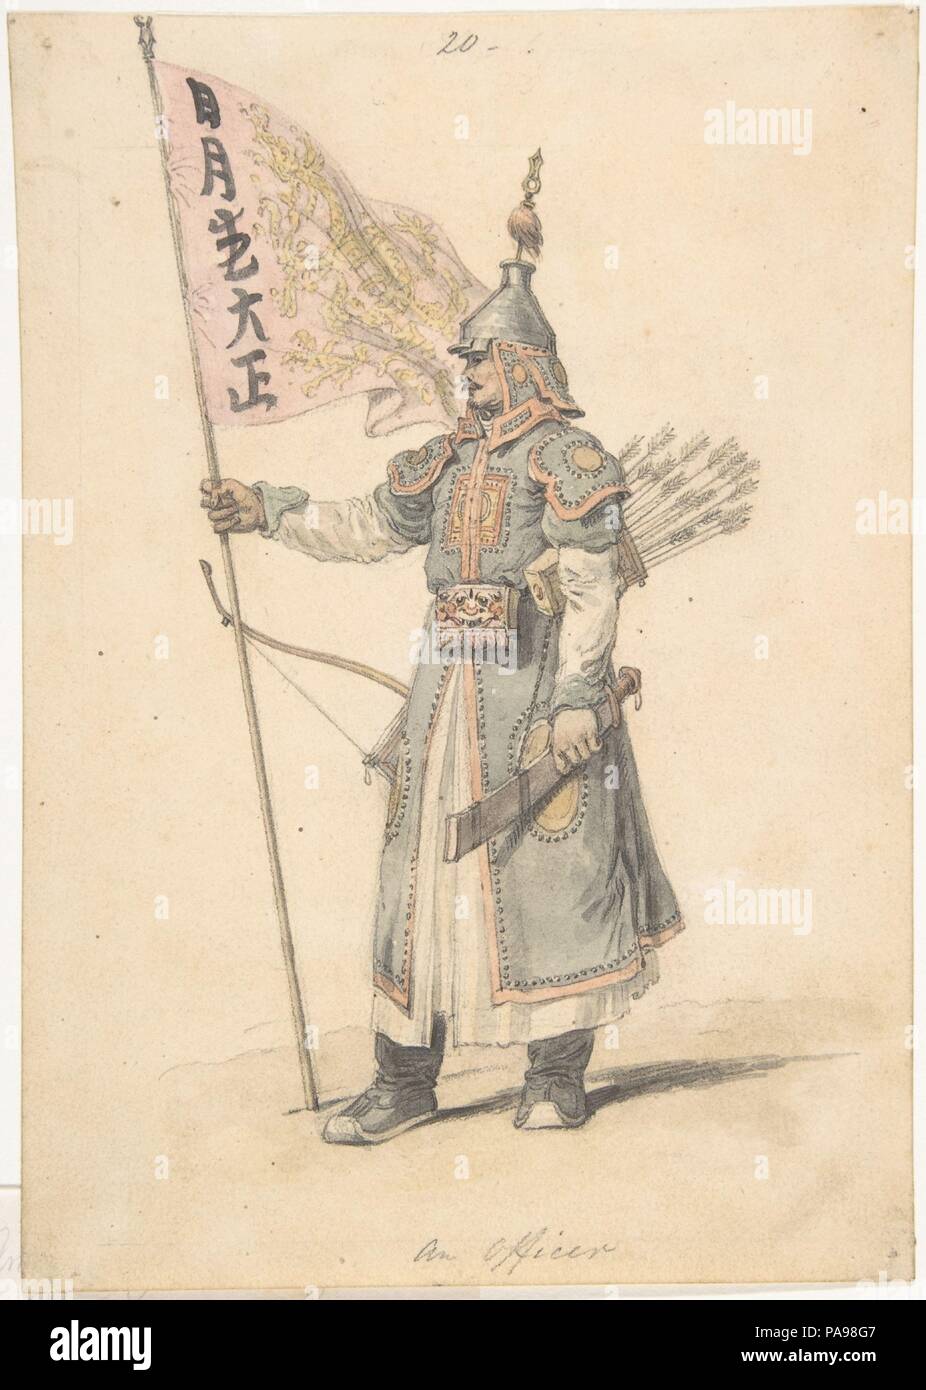 An Officer of the Corps of Bowmen. Artist: William Alexander (British, Maidstone, Kent 1767-1816 Maidstone, Kent). Dimensions: 7-11/16 x 5-3/8 in.  (19.5 x 13.6 cm). Date: 1797-1805.  In 1792 Alexander was appointed as draftsman to accompany the British embassy to the emperor's court in Peking, led by Lord Macartney. After returning to England in 1794, the artist illustrated the official report, and several publications of his own, with this drawing of a Chinese bowman engraved for plate 20 in 'The Costume of China, or Picturesque Representations of The Dress and Manners of the Chinese' (1805) Stock Photo